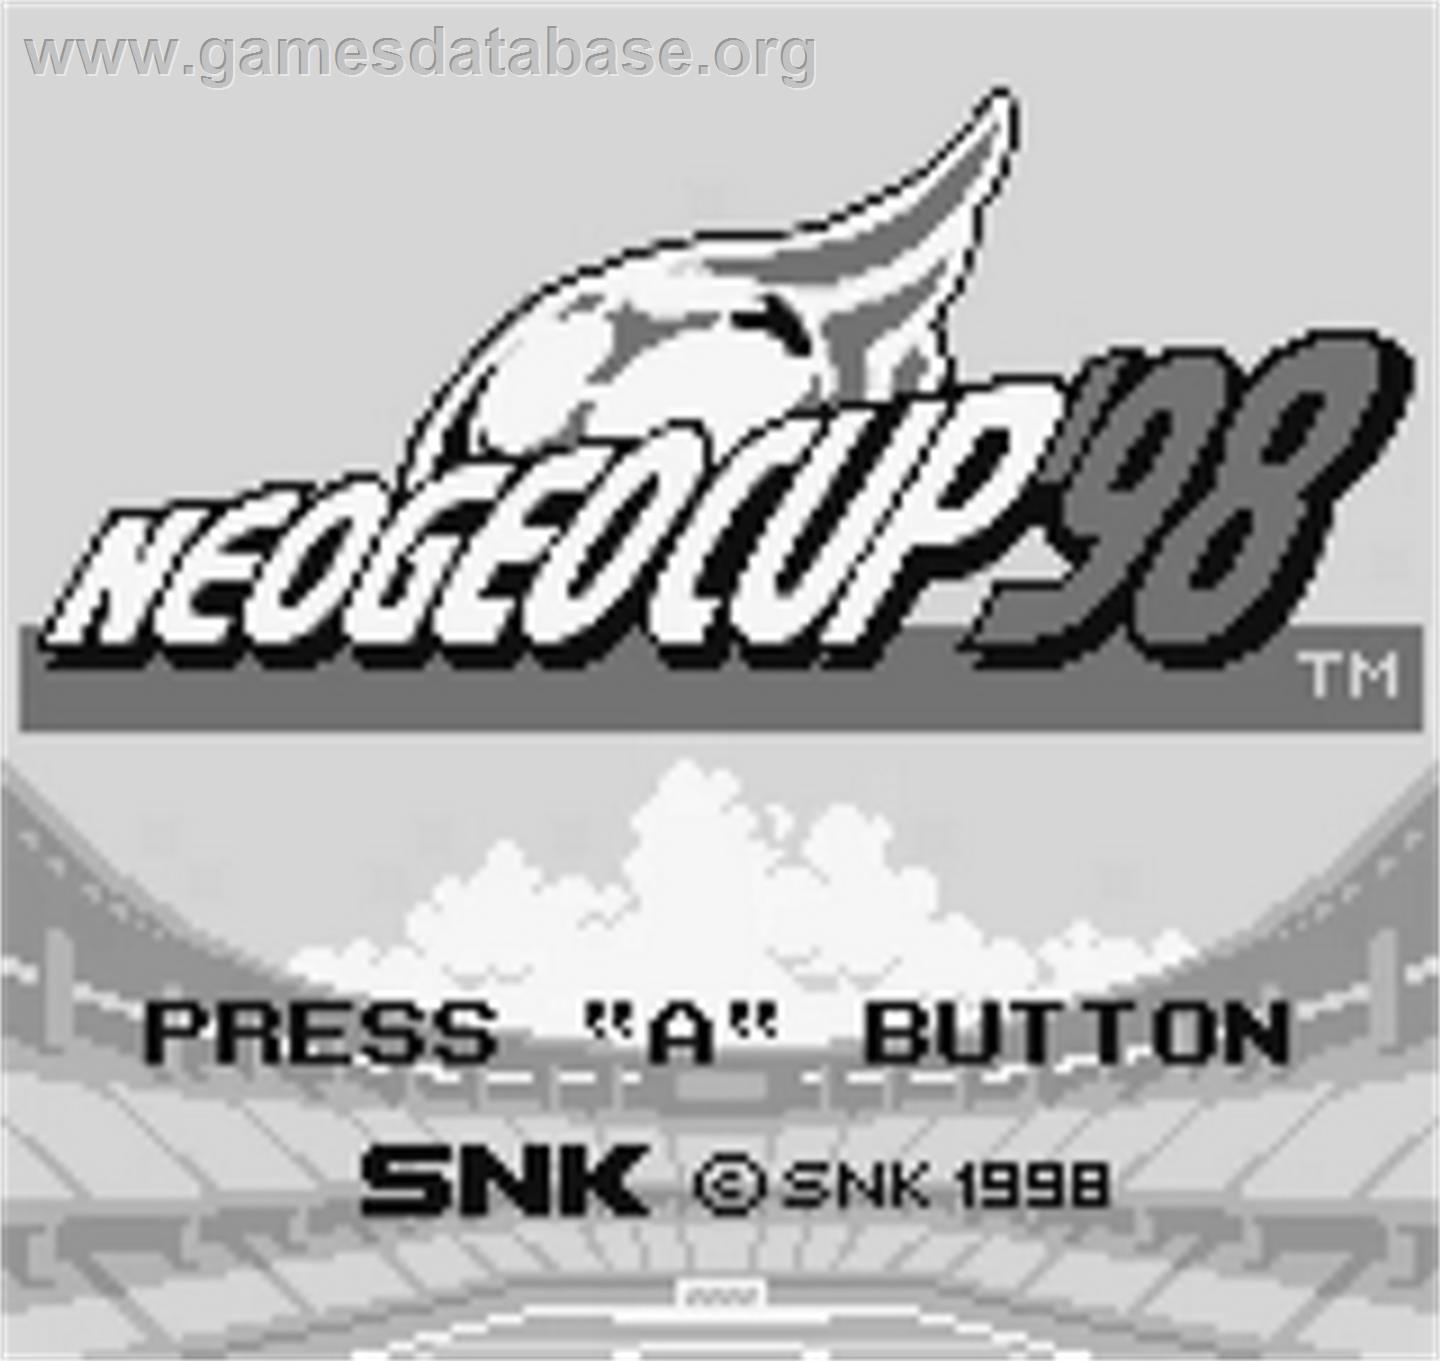 Neo-Geo Cup '98 - The Road to the Victory - SNK Neo-Geo Pocket - Artwork - Title Screen